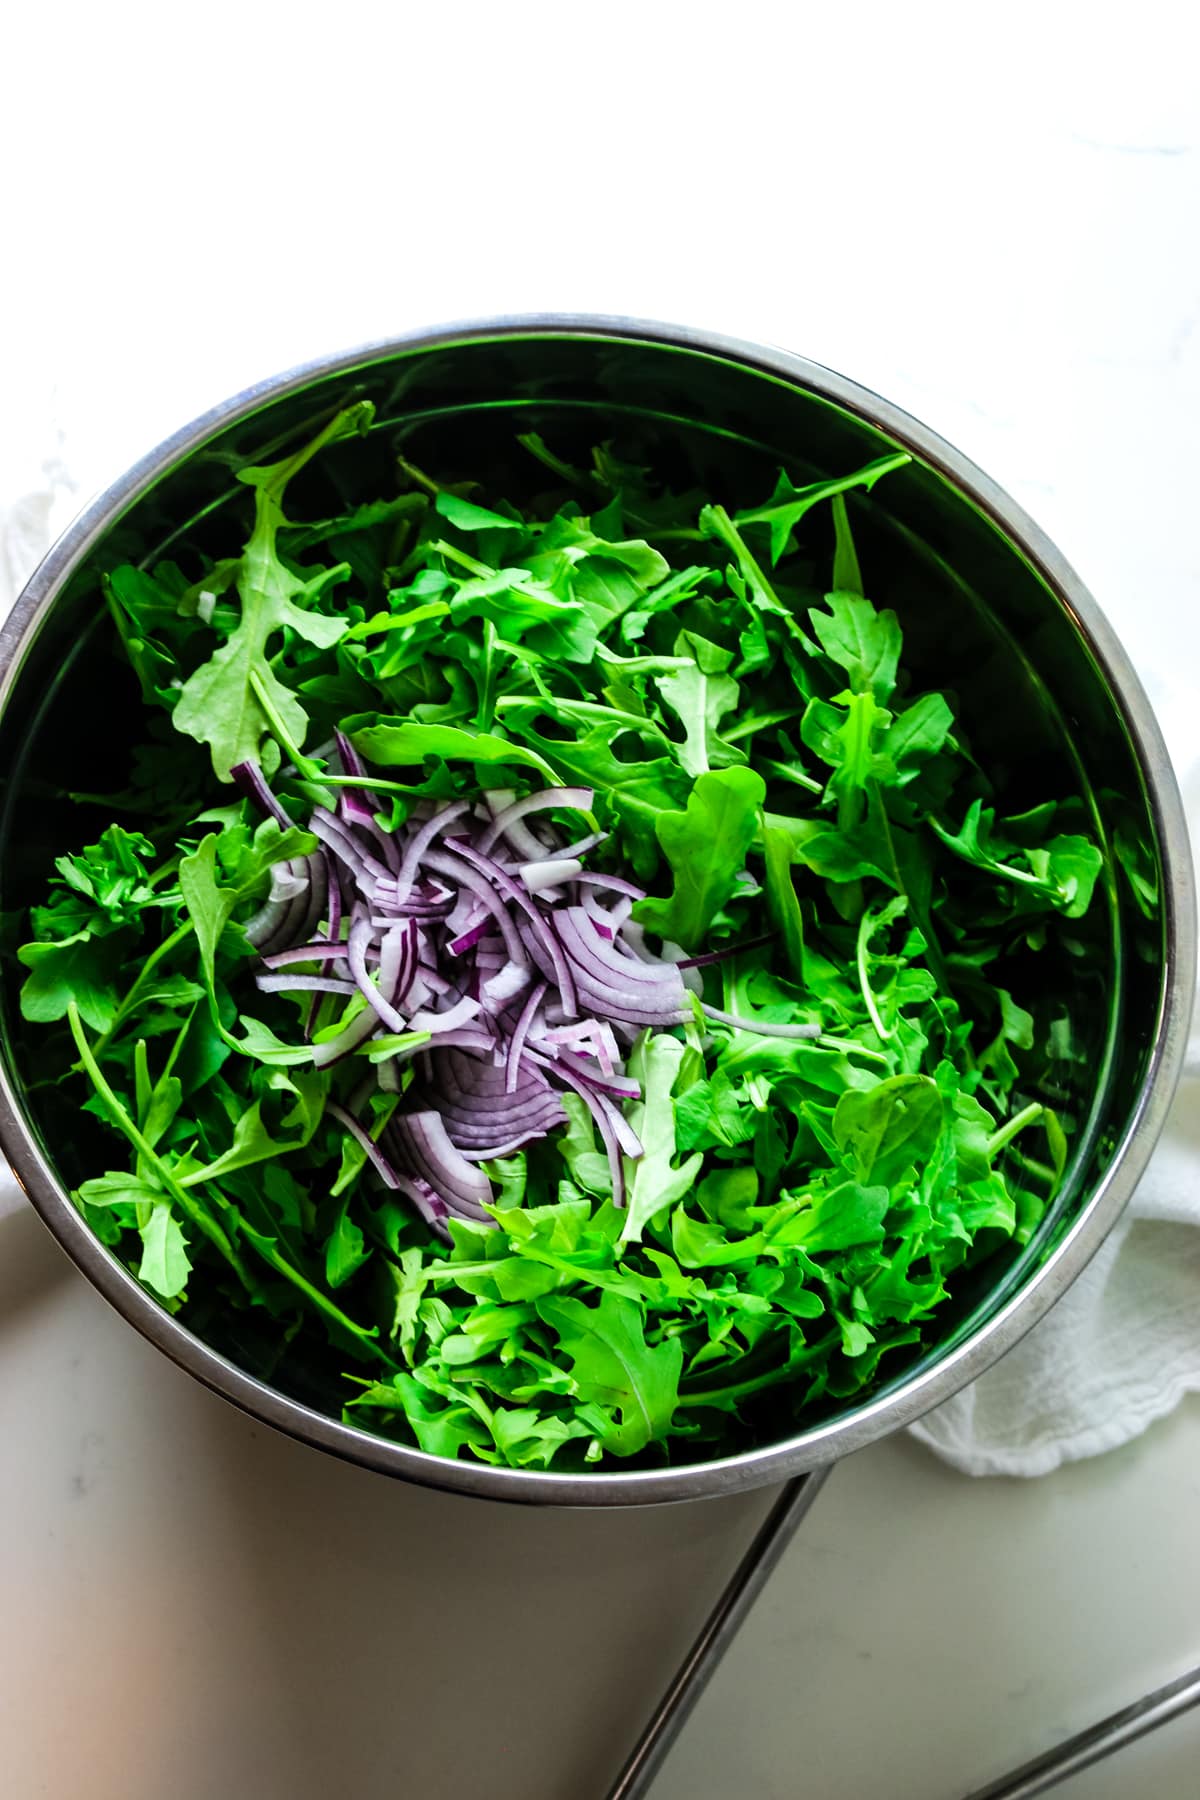 first step in making arugula salad is tossing the arugula or rocket leaves with red onion and salad dressing in large stainless steel bowl.